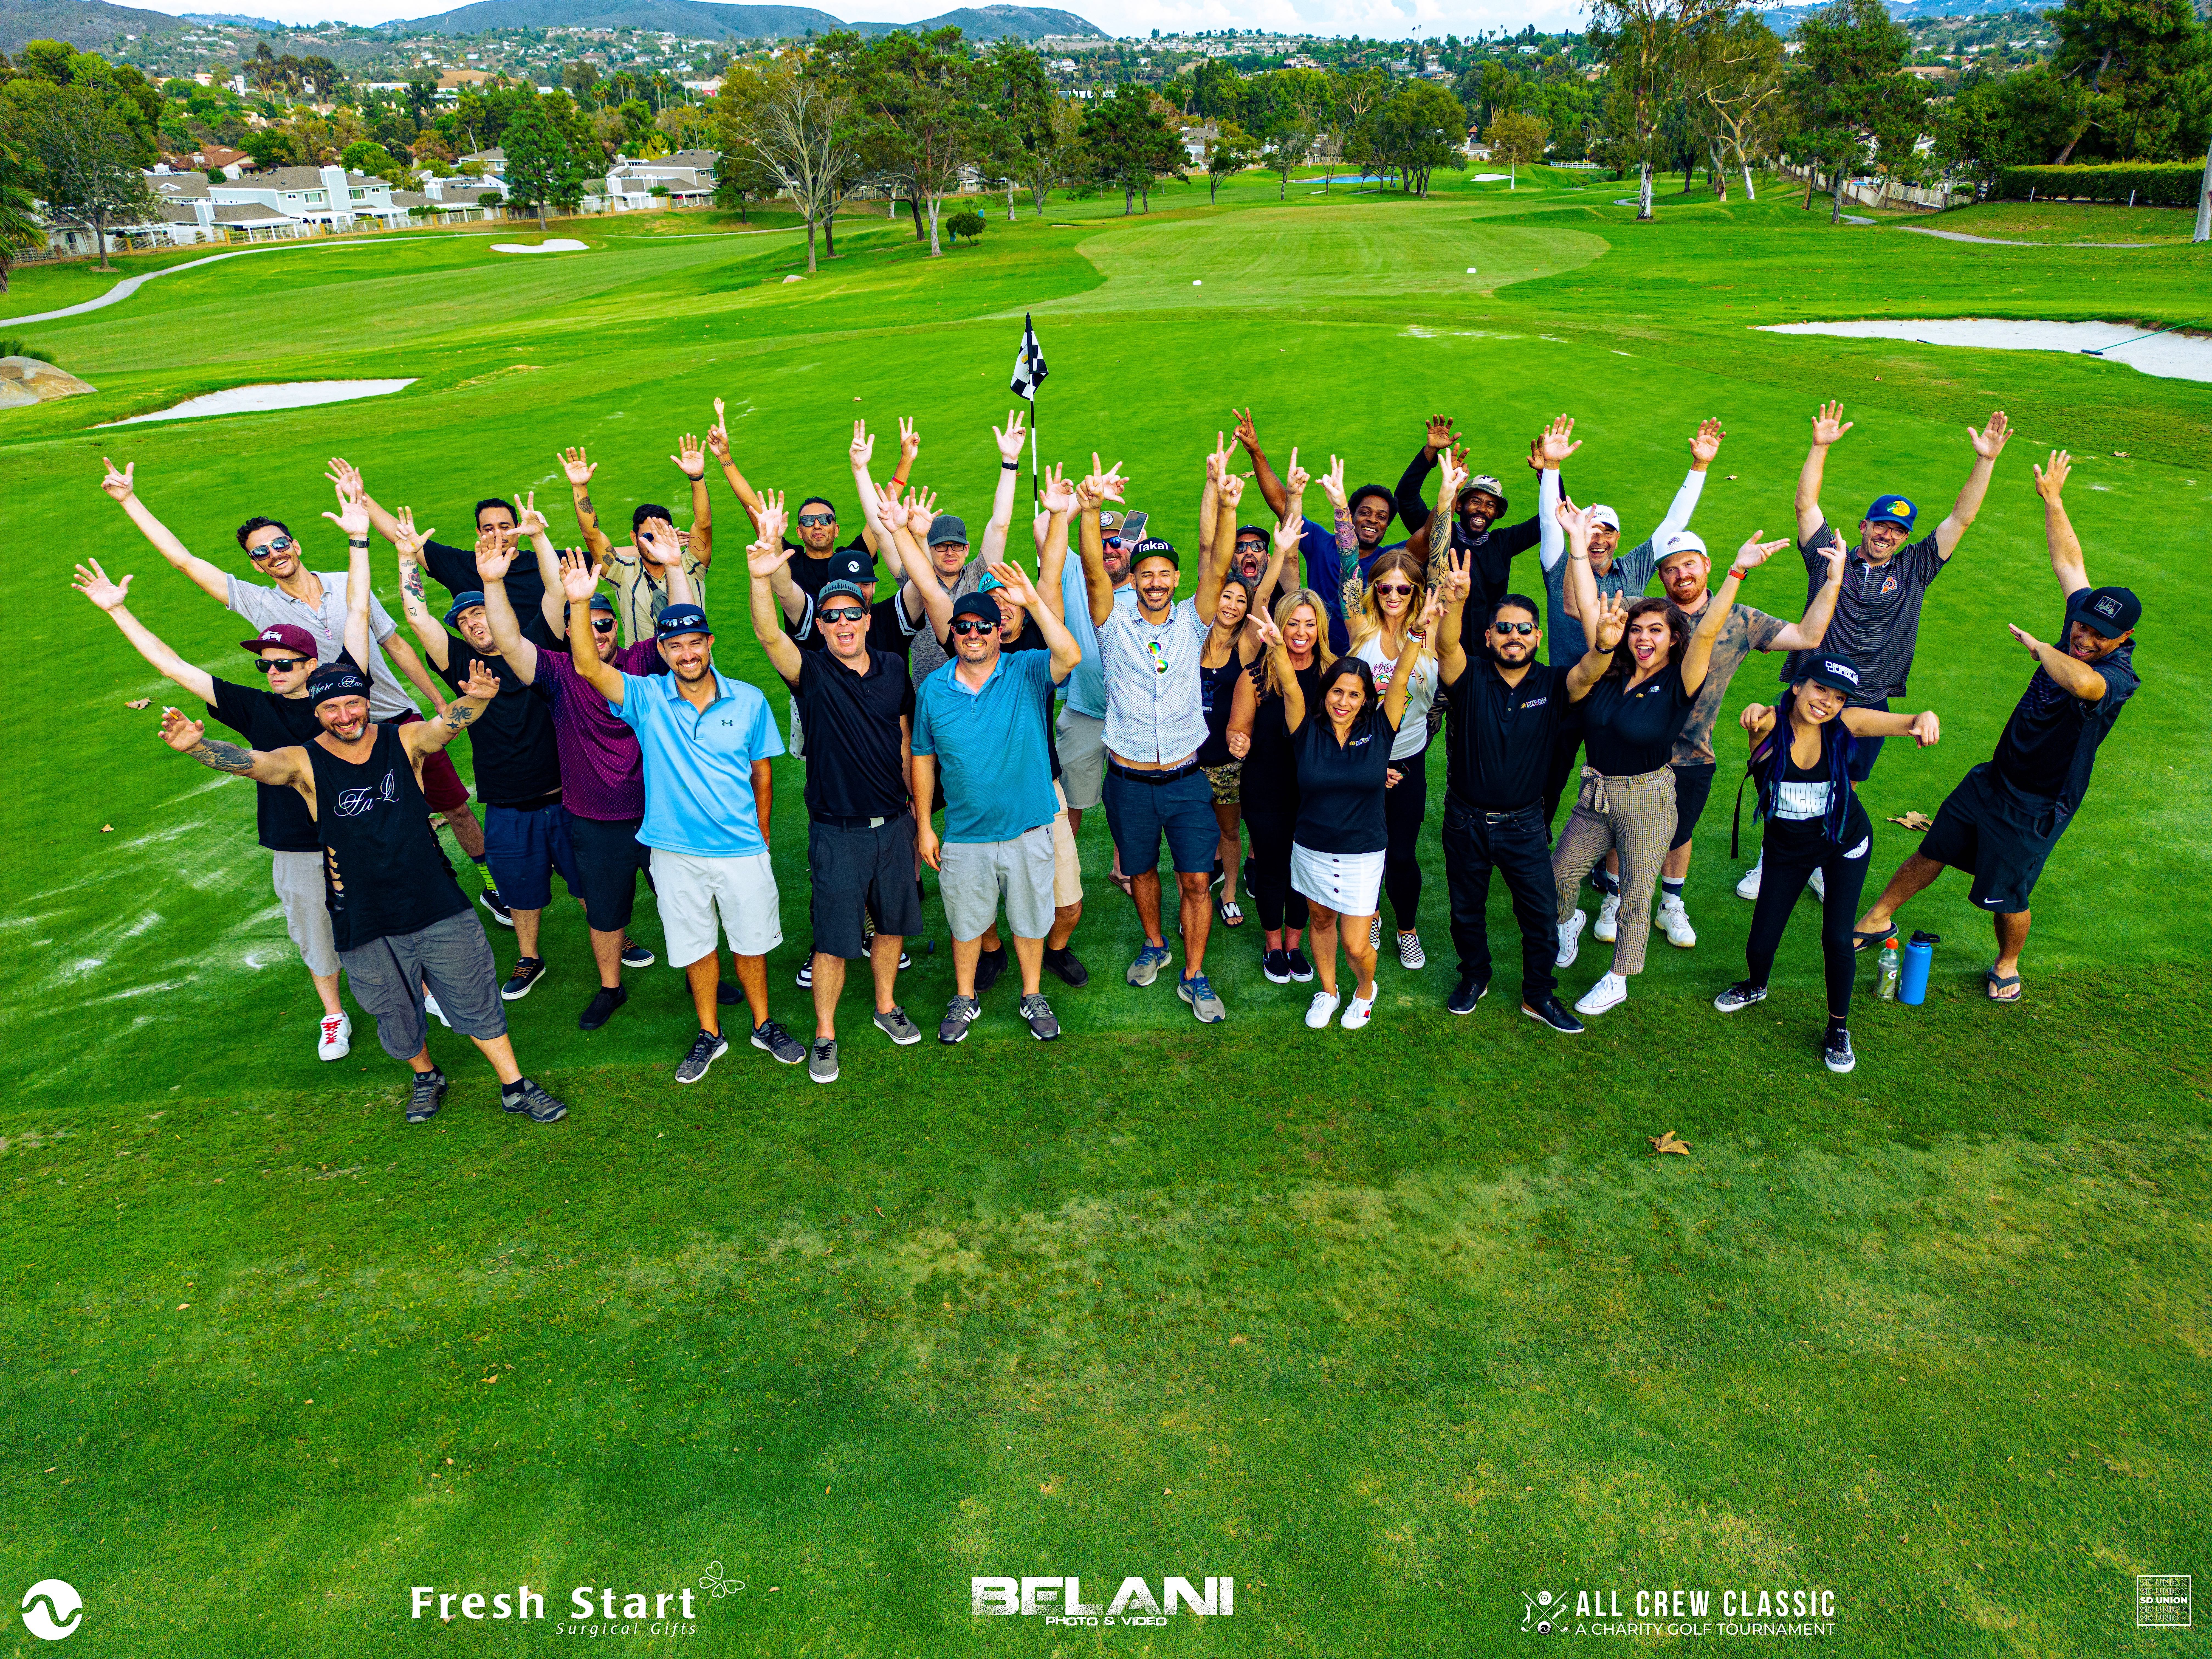 The All Crew Classic Charity Golf Tournament participants